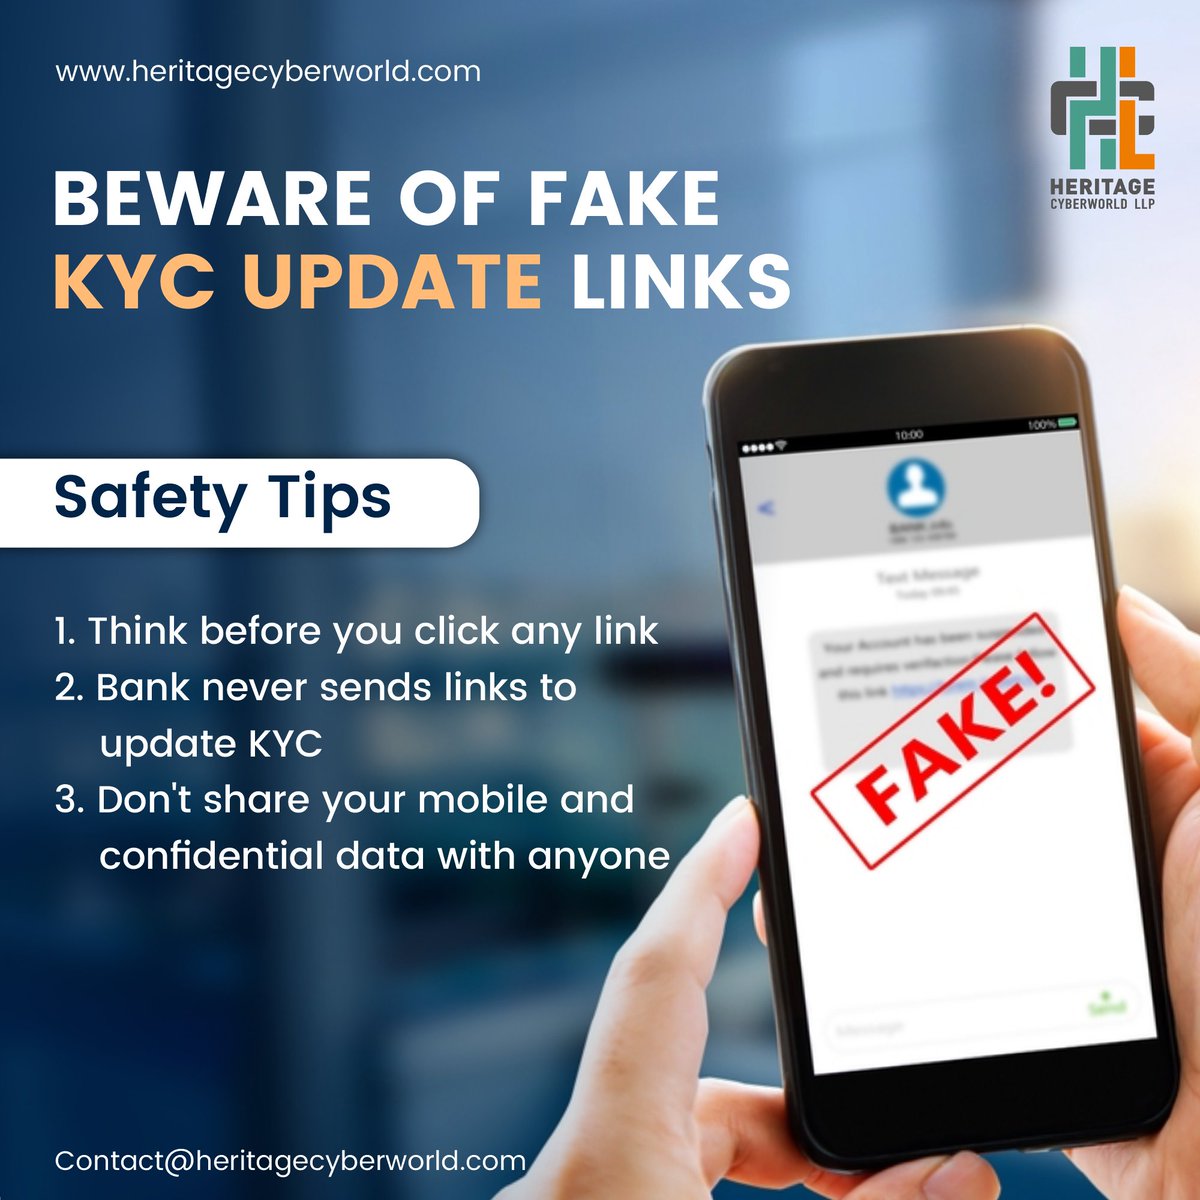 KYC fraud is real, and it has increased across the country. The fraudster sends a text message pretending to be a bank/company representative to get your personal details. 

#cybersecurity #heritagecyberworld #cyberworld #cybersecurity  #fraudsters #upadtelinks #safetytips